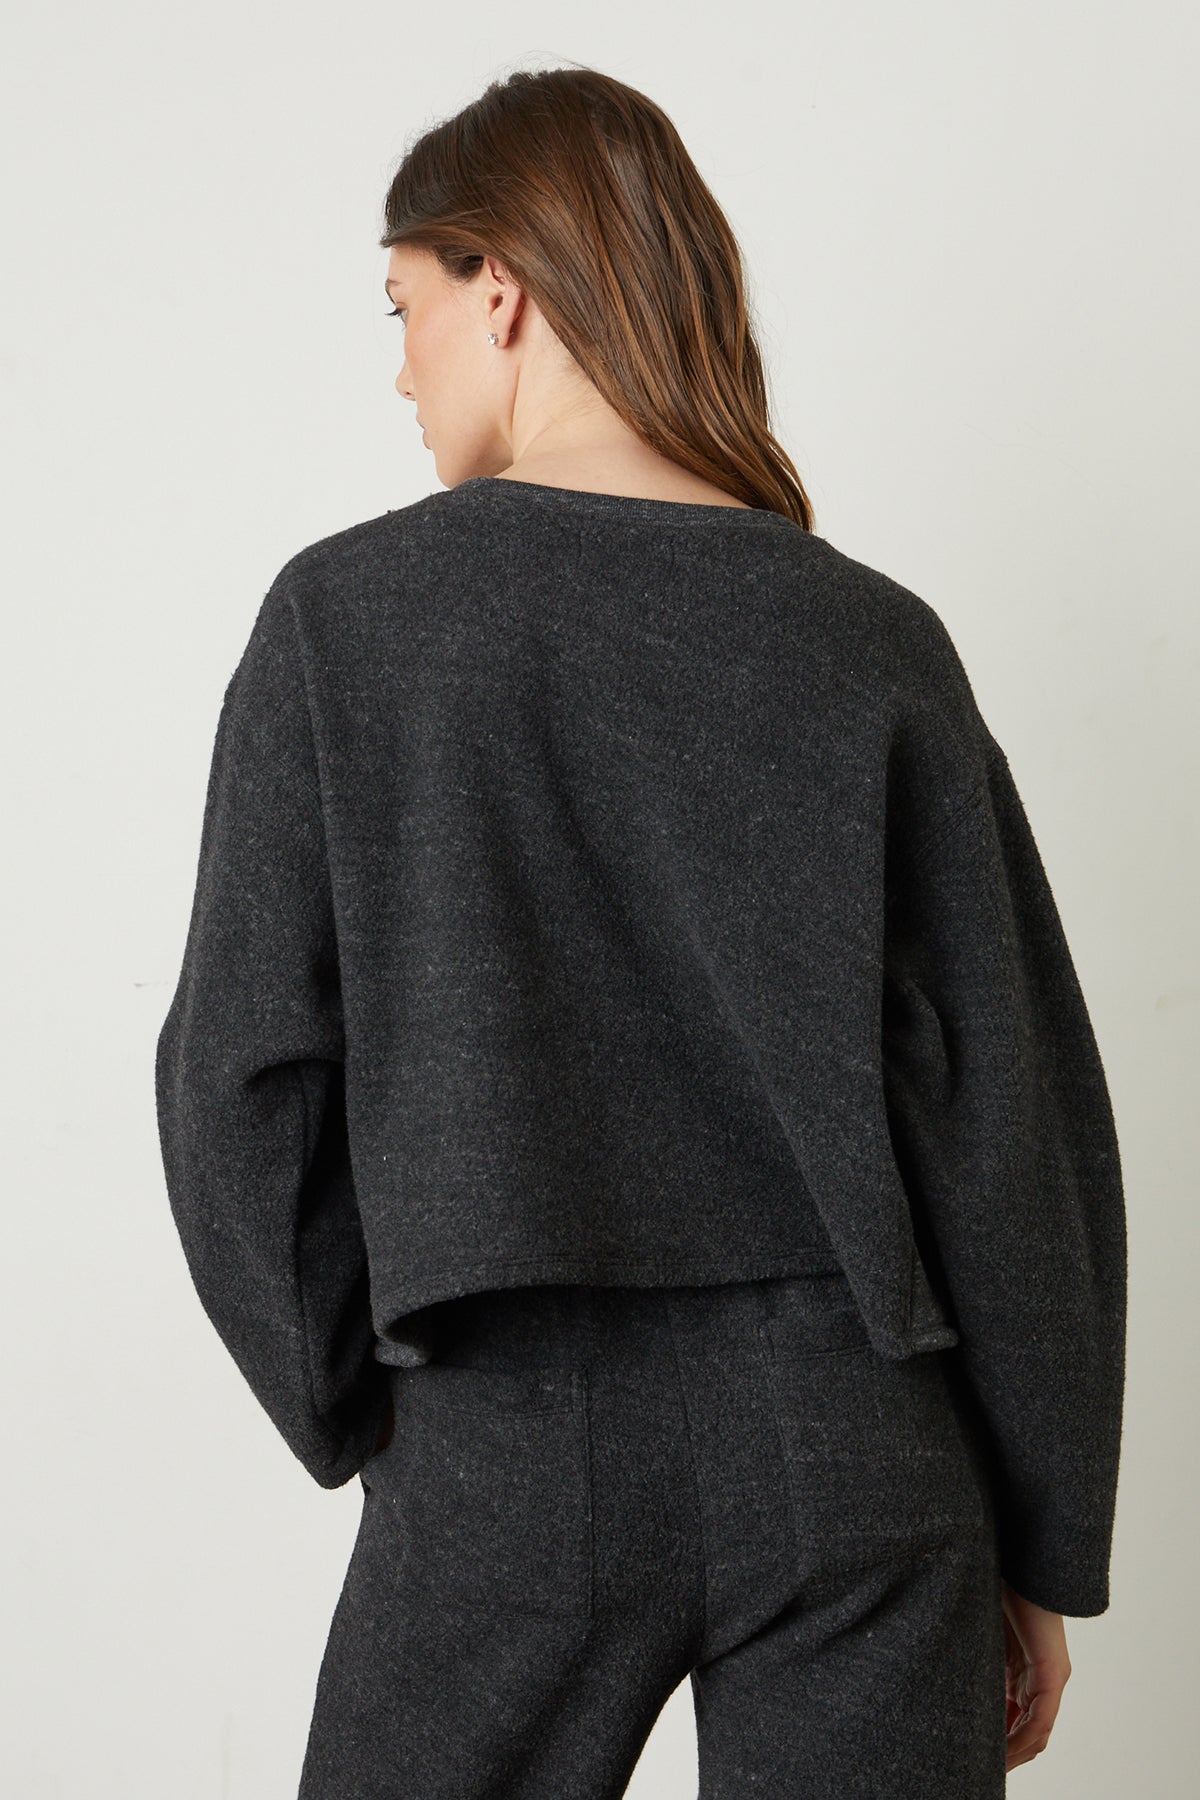 the back view of a woman wearing a Velvet by Graham & Spencer ARISSA CROPPED SWEATSHIRT and pants.-25745169350849